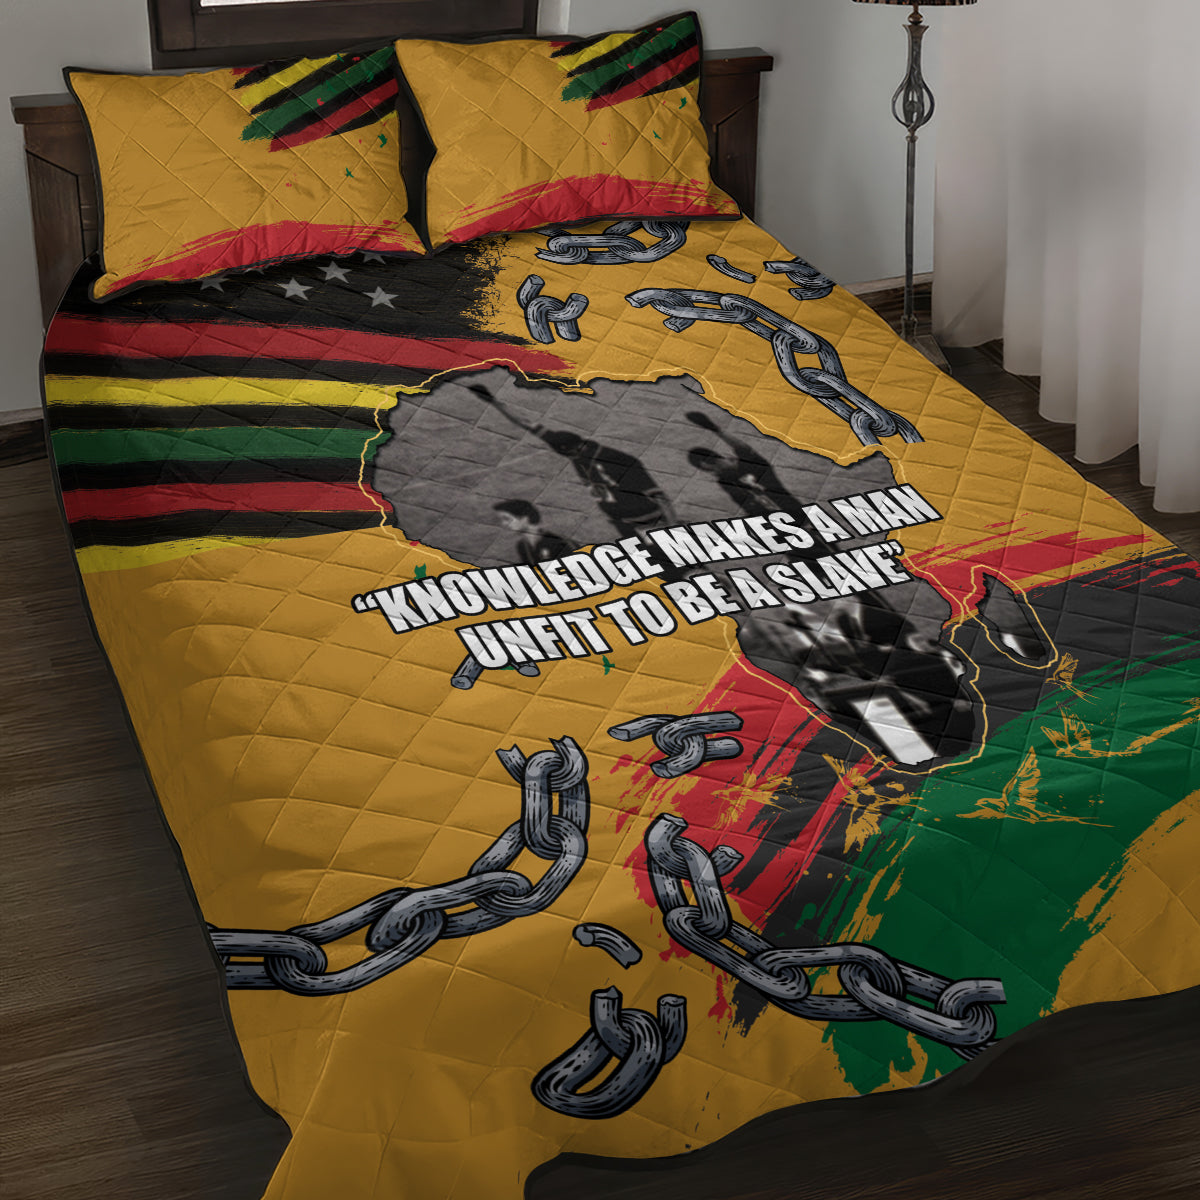 Juneteenth Freedom Day Quilt Bed Set 1968 Olympics Black Power Salute Broken Chain